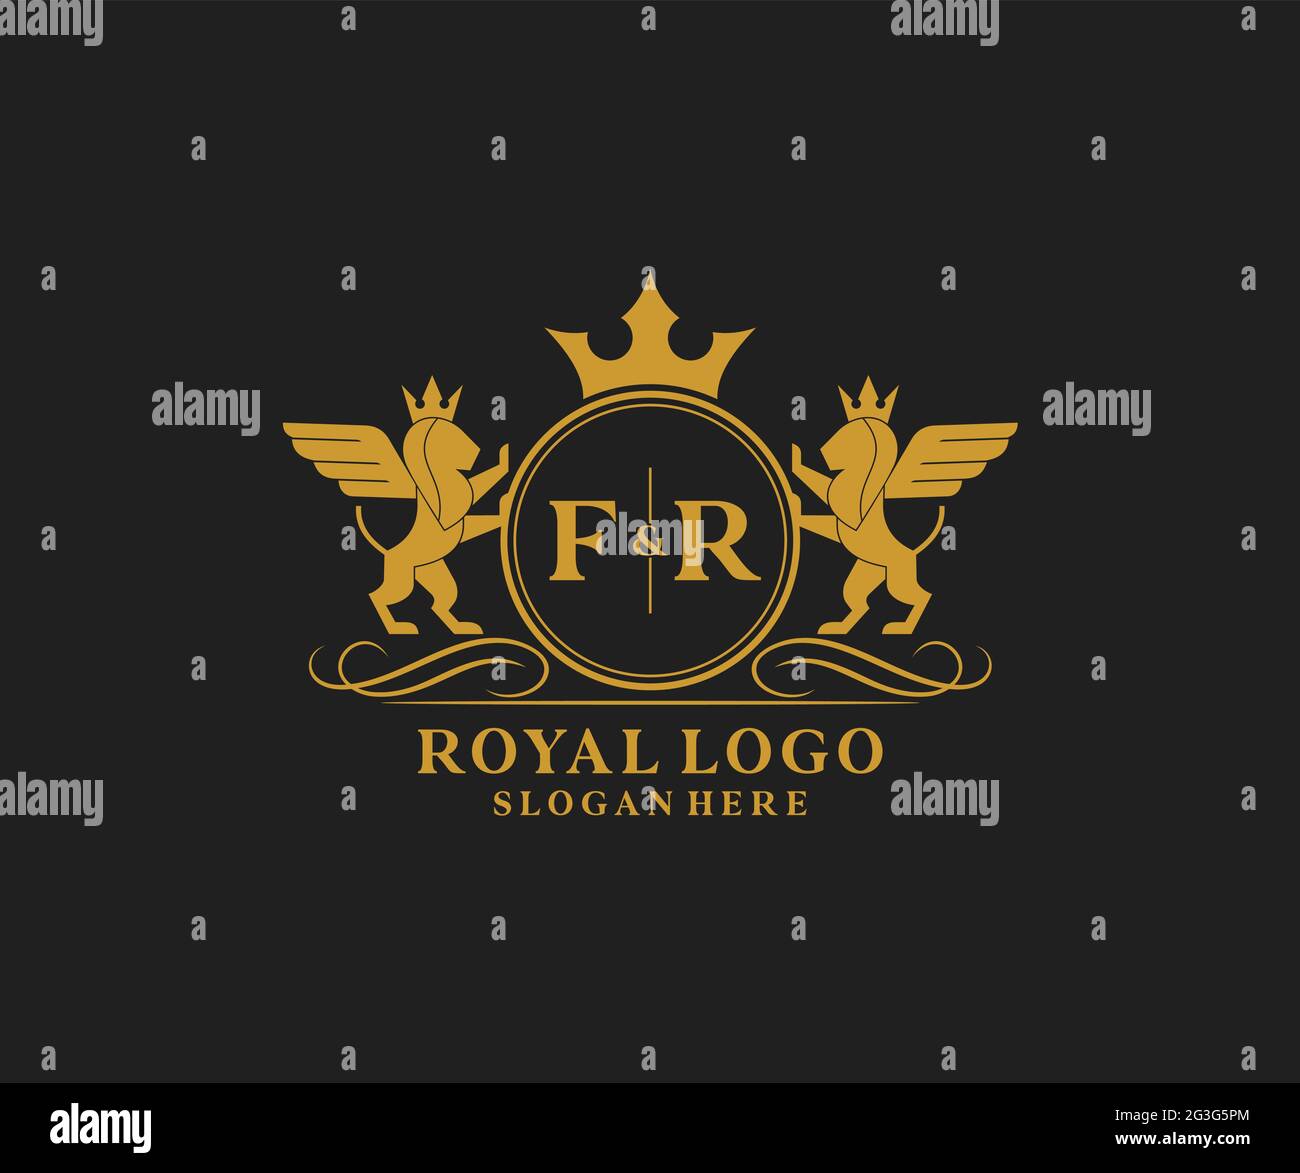 FR Letter Lion Royal Luxury Heraldic,Crest Logo template in vector art for Restaurant, Royalty, Boutique, Cafe, Hotel, Heraldic, Jewelry, Fashion and Stock Vector